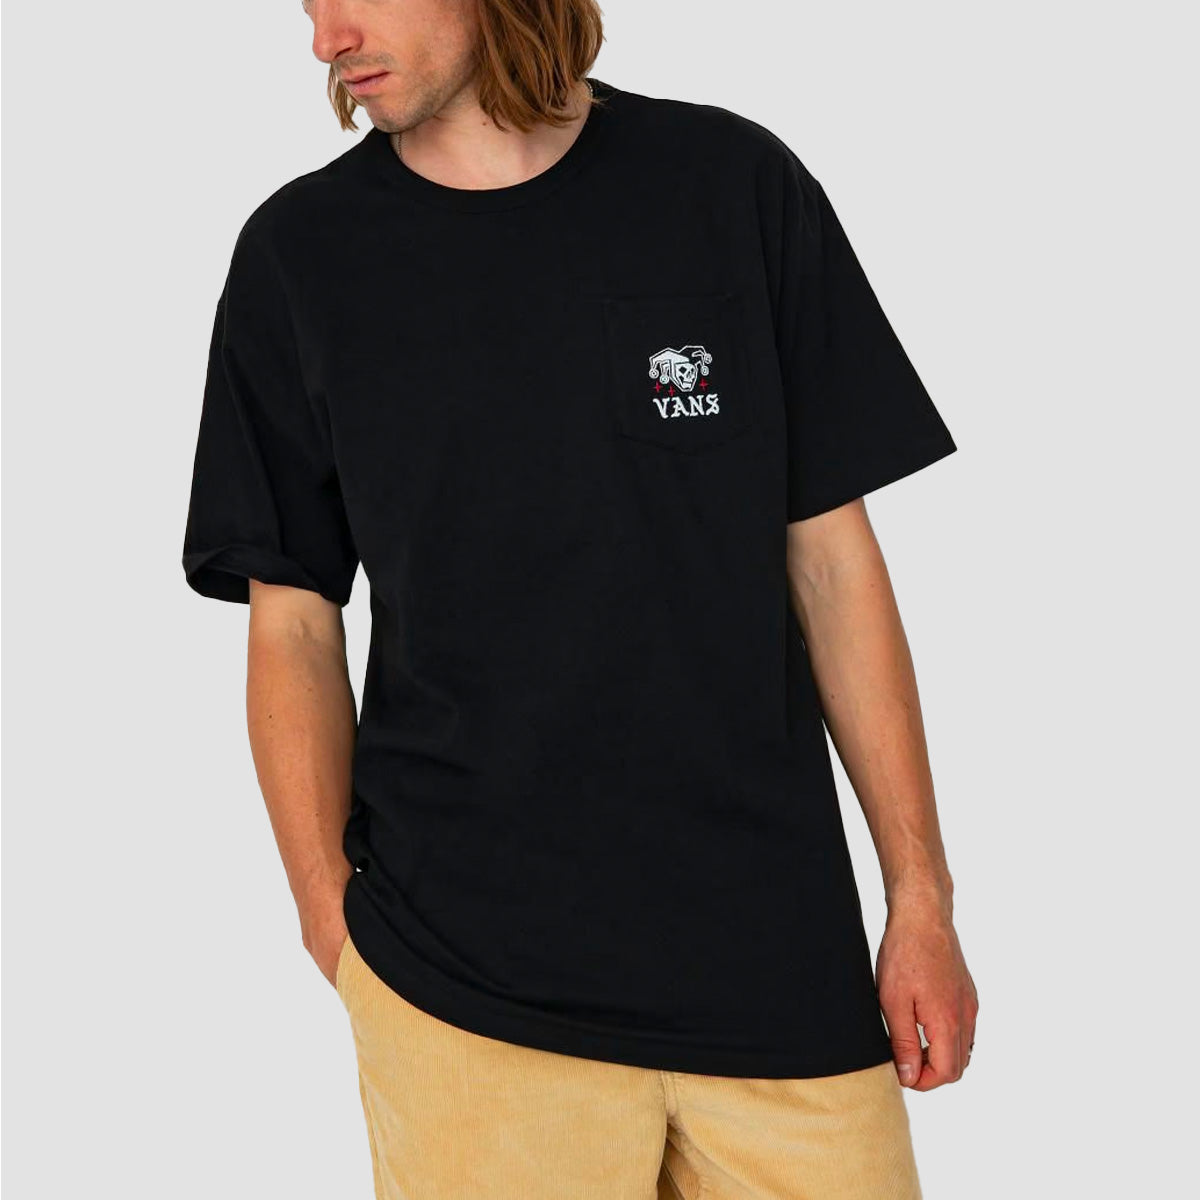 Vans Off The Wall Graphic Pocket T-Shirt Black/Chili Pepper